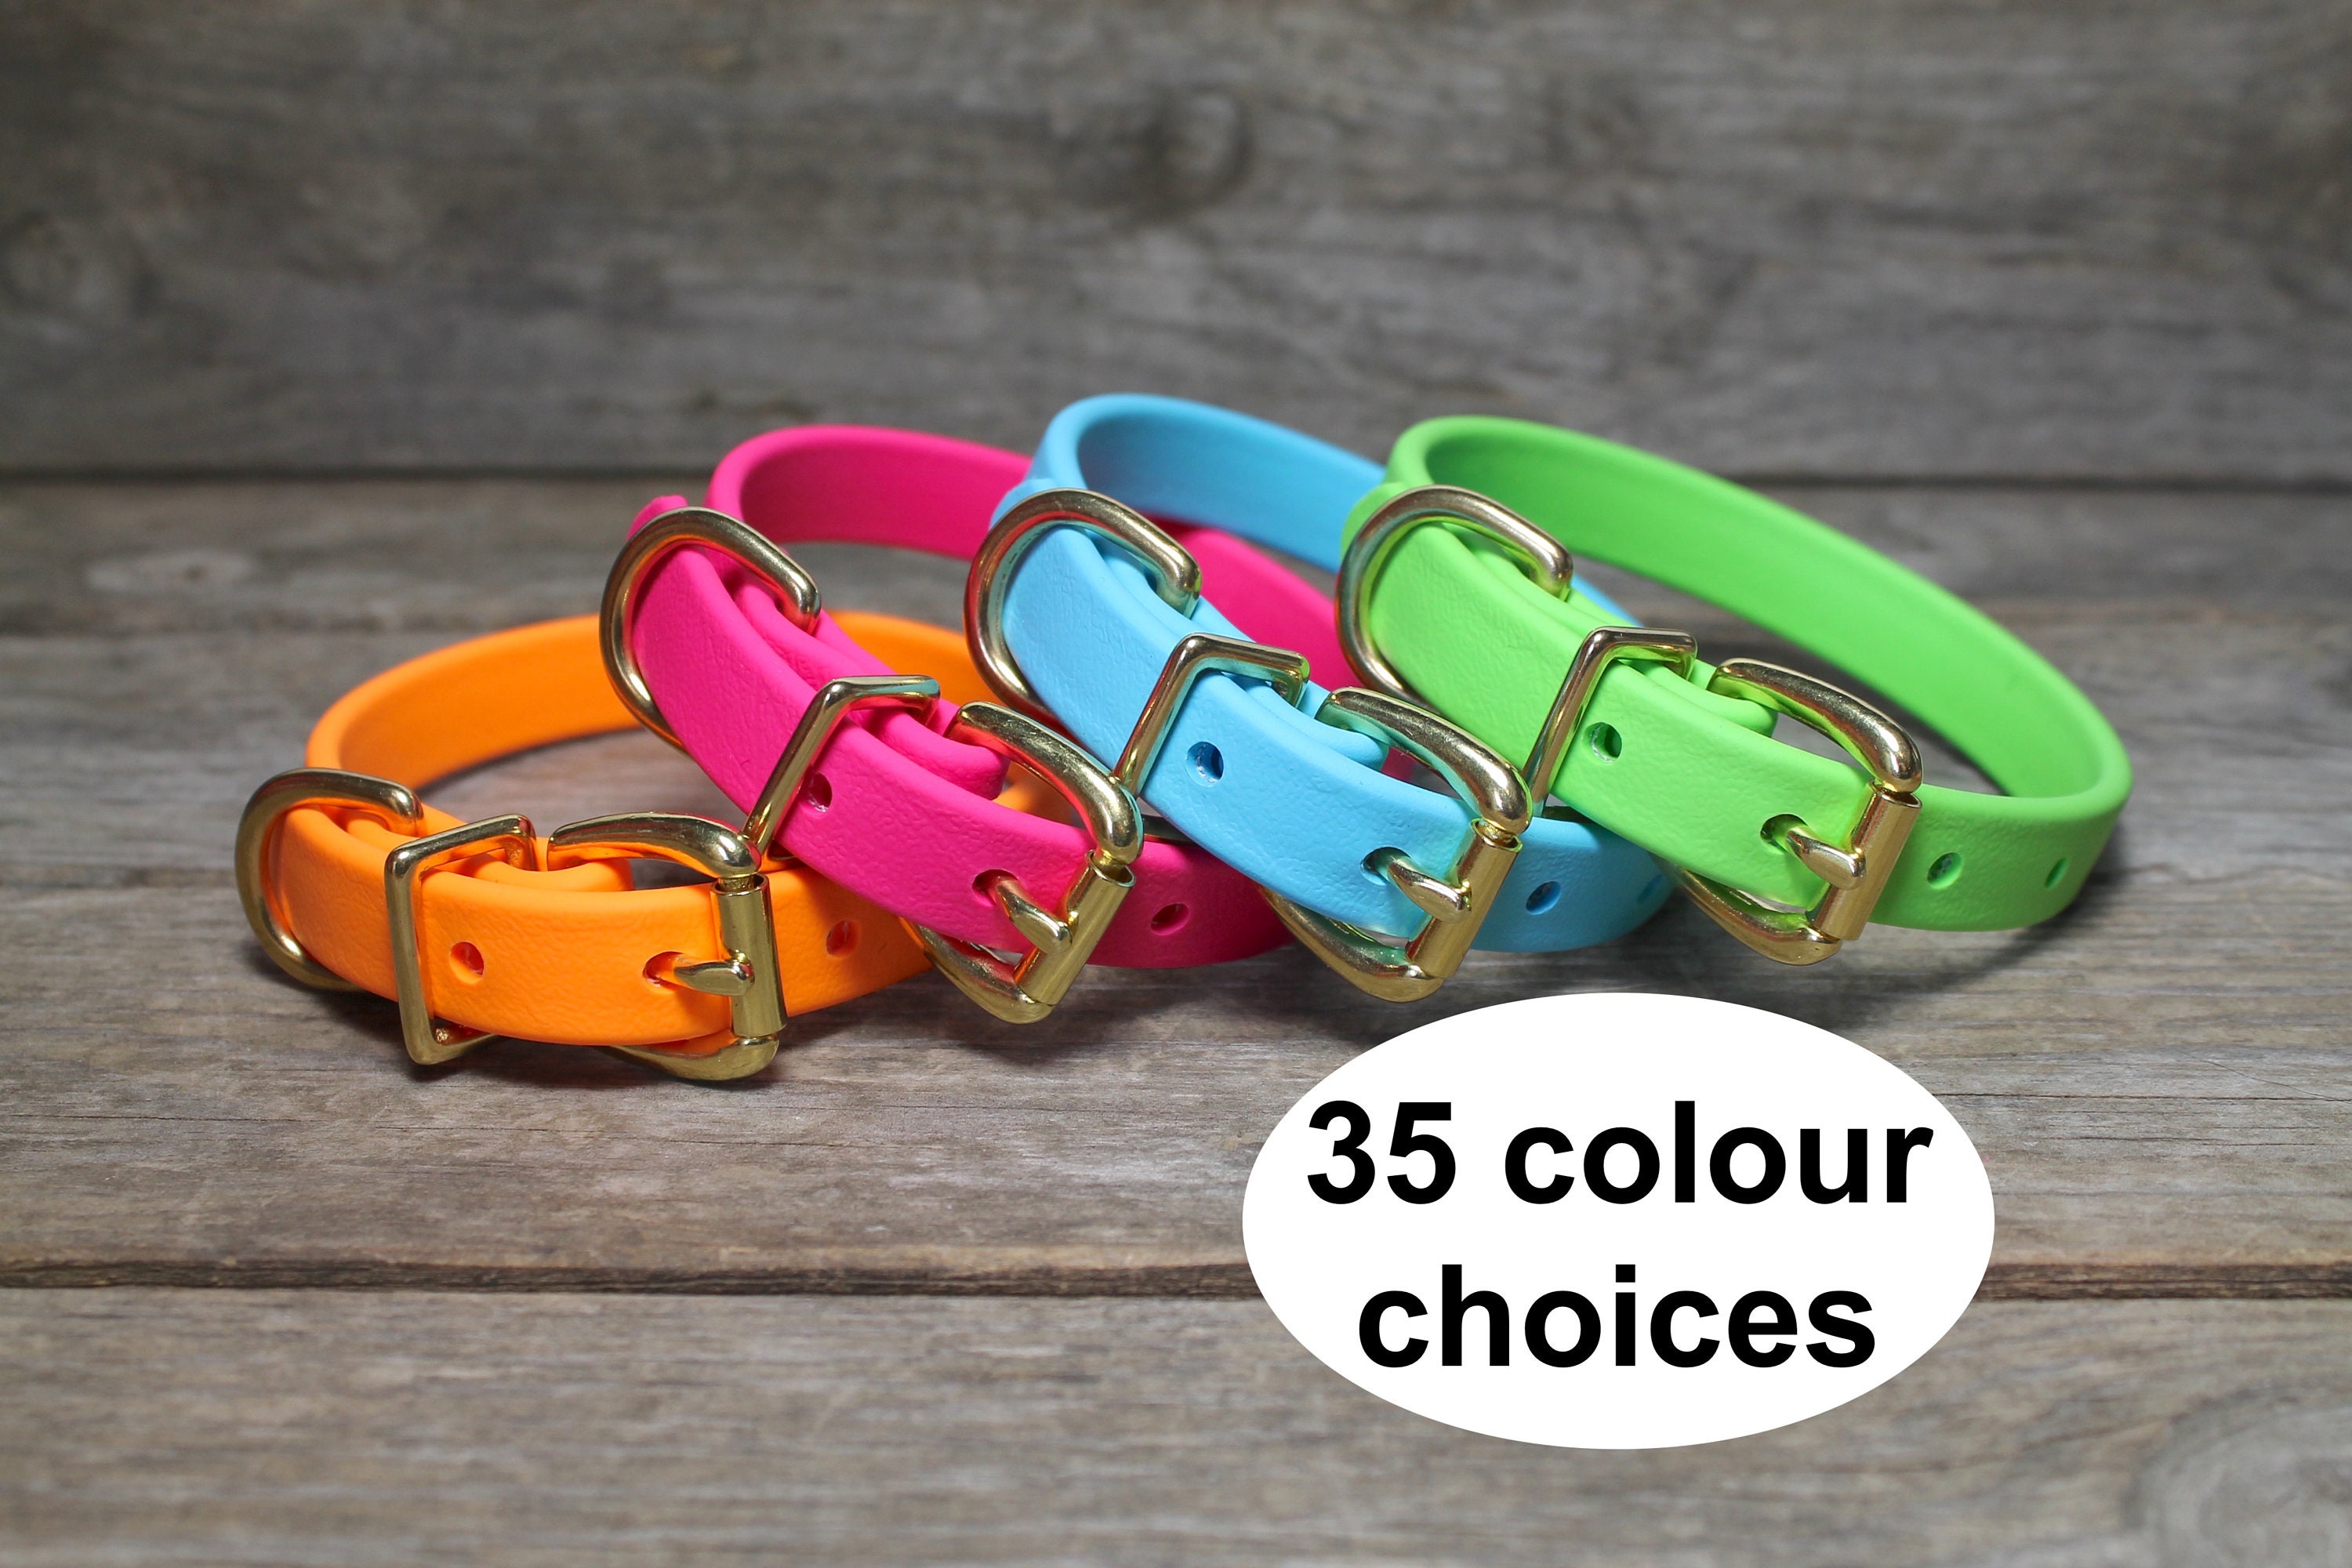 1.5 Colored Dog Collar HARDWARE KITS 6 Color Choice buckle-slide-D ring